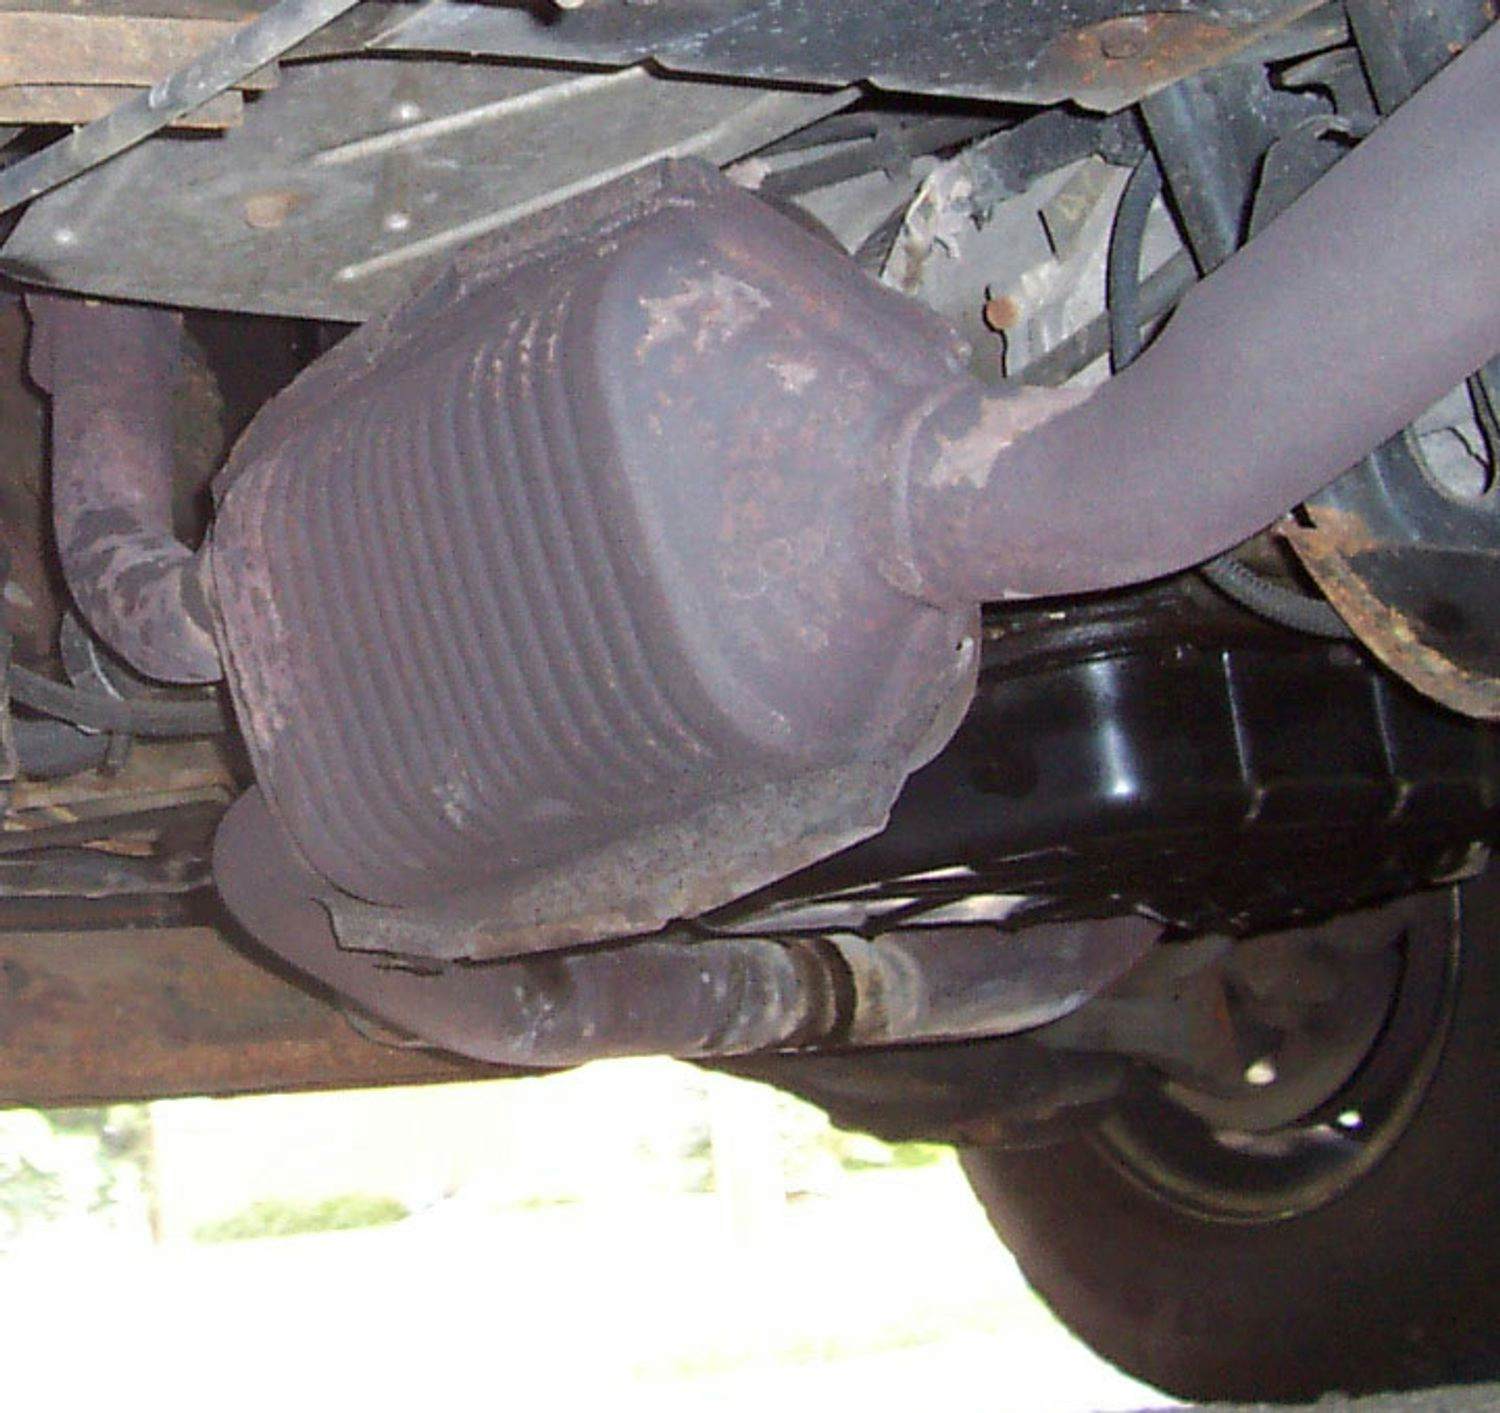 Catalytic converter: What is its function, and how can it be damaged?